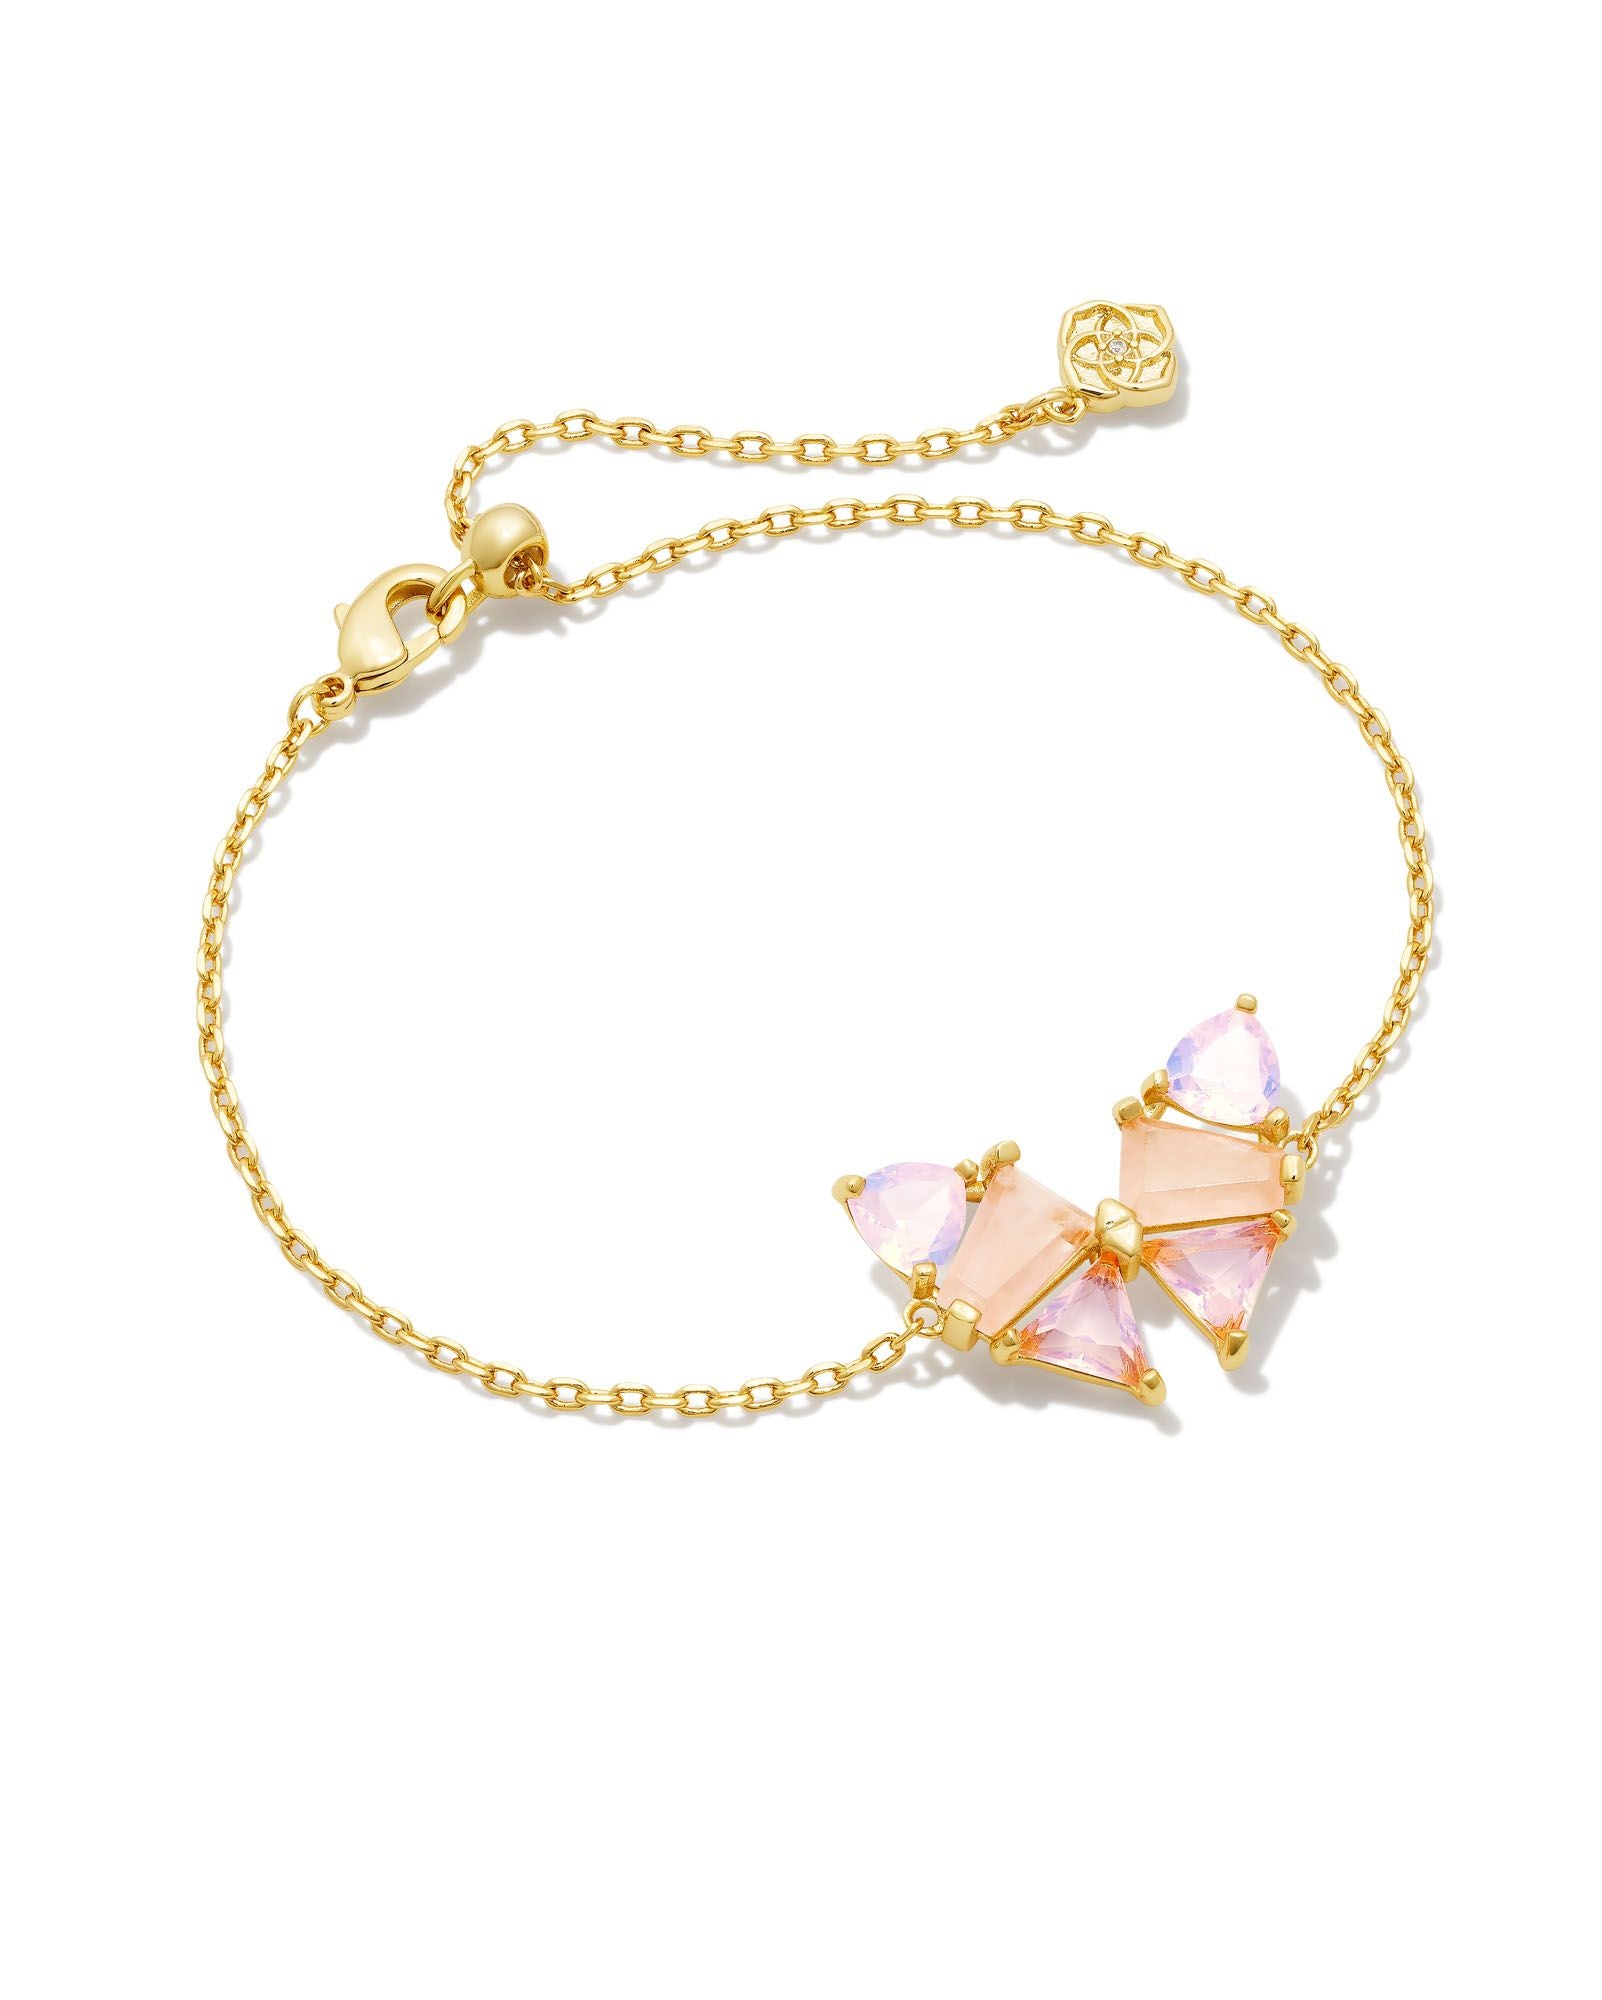 Blair Delicate Chain Bracelet in Gold Pink Mix